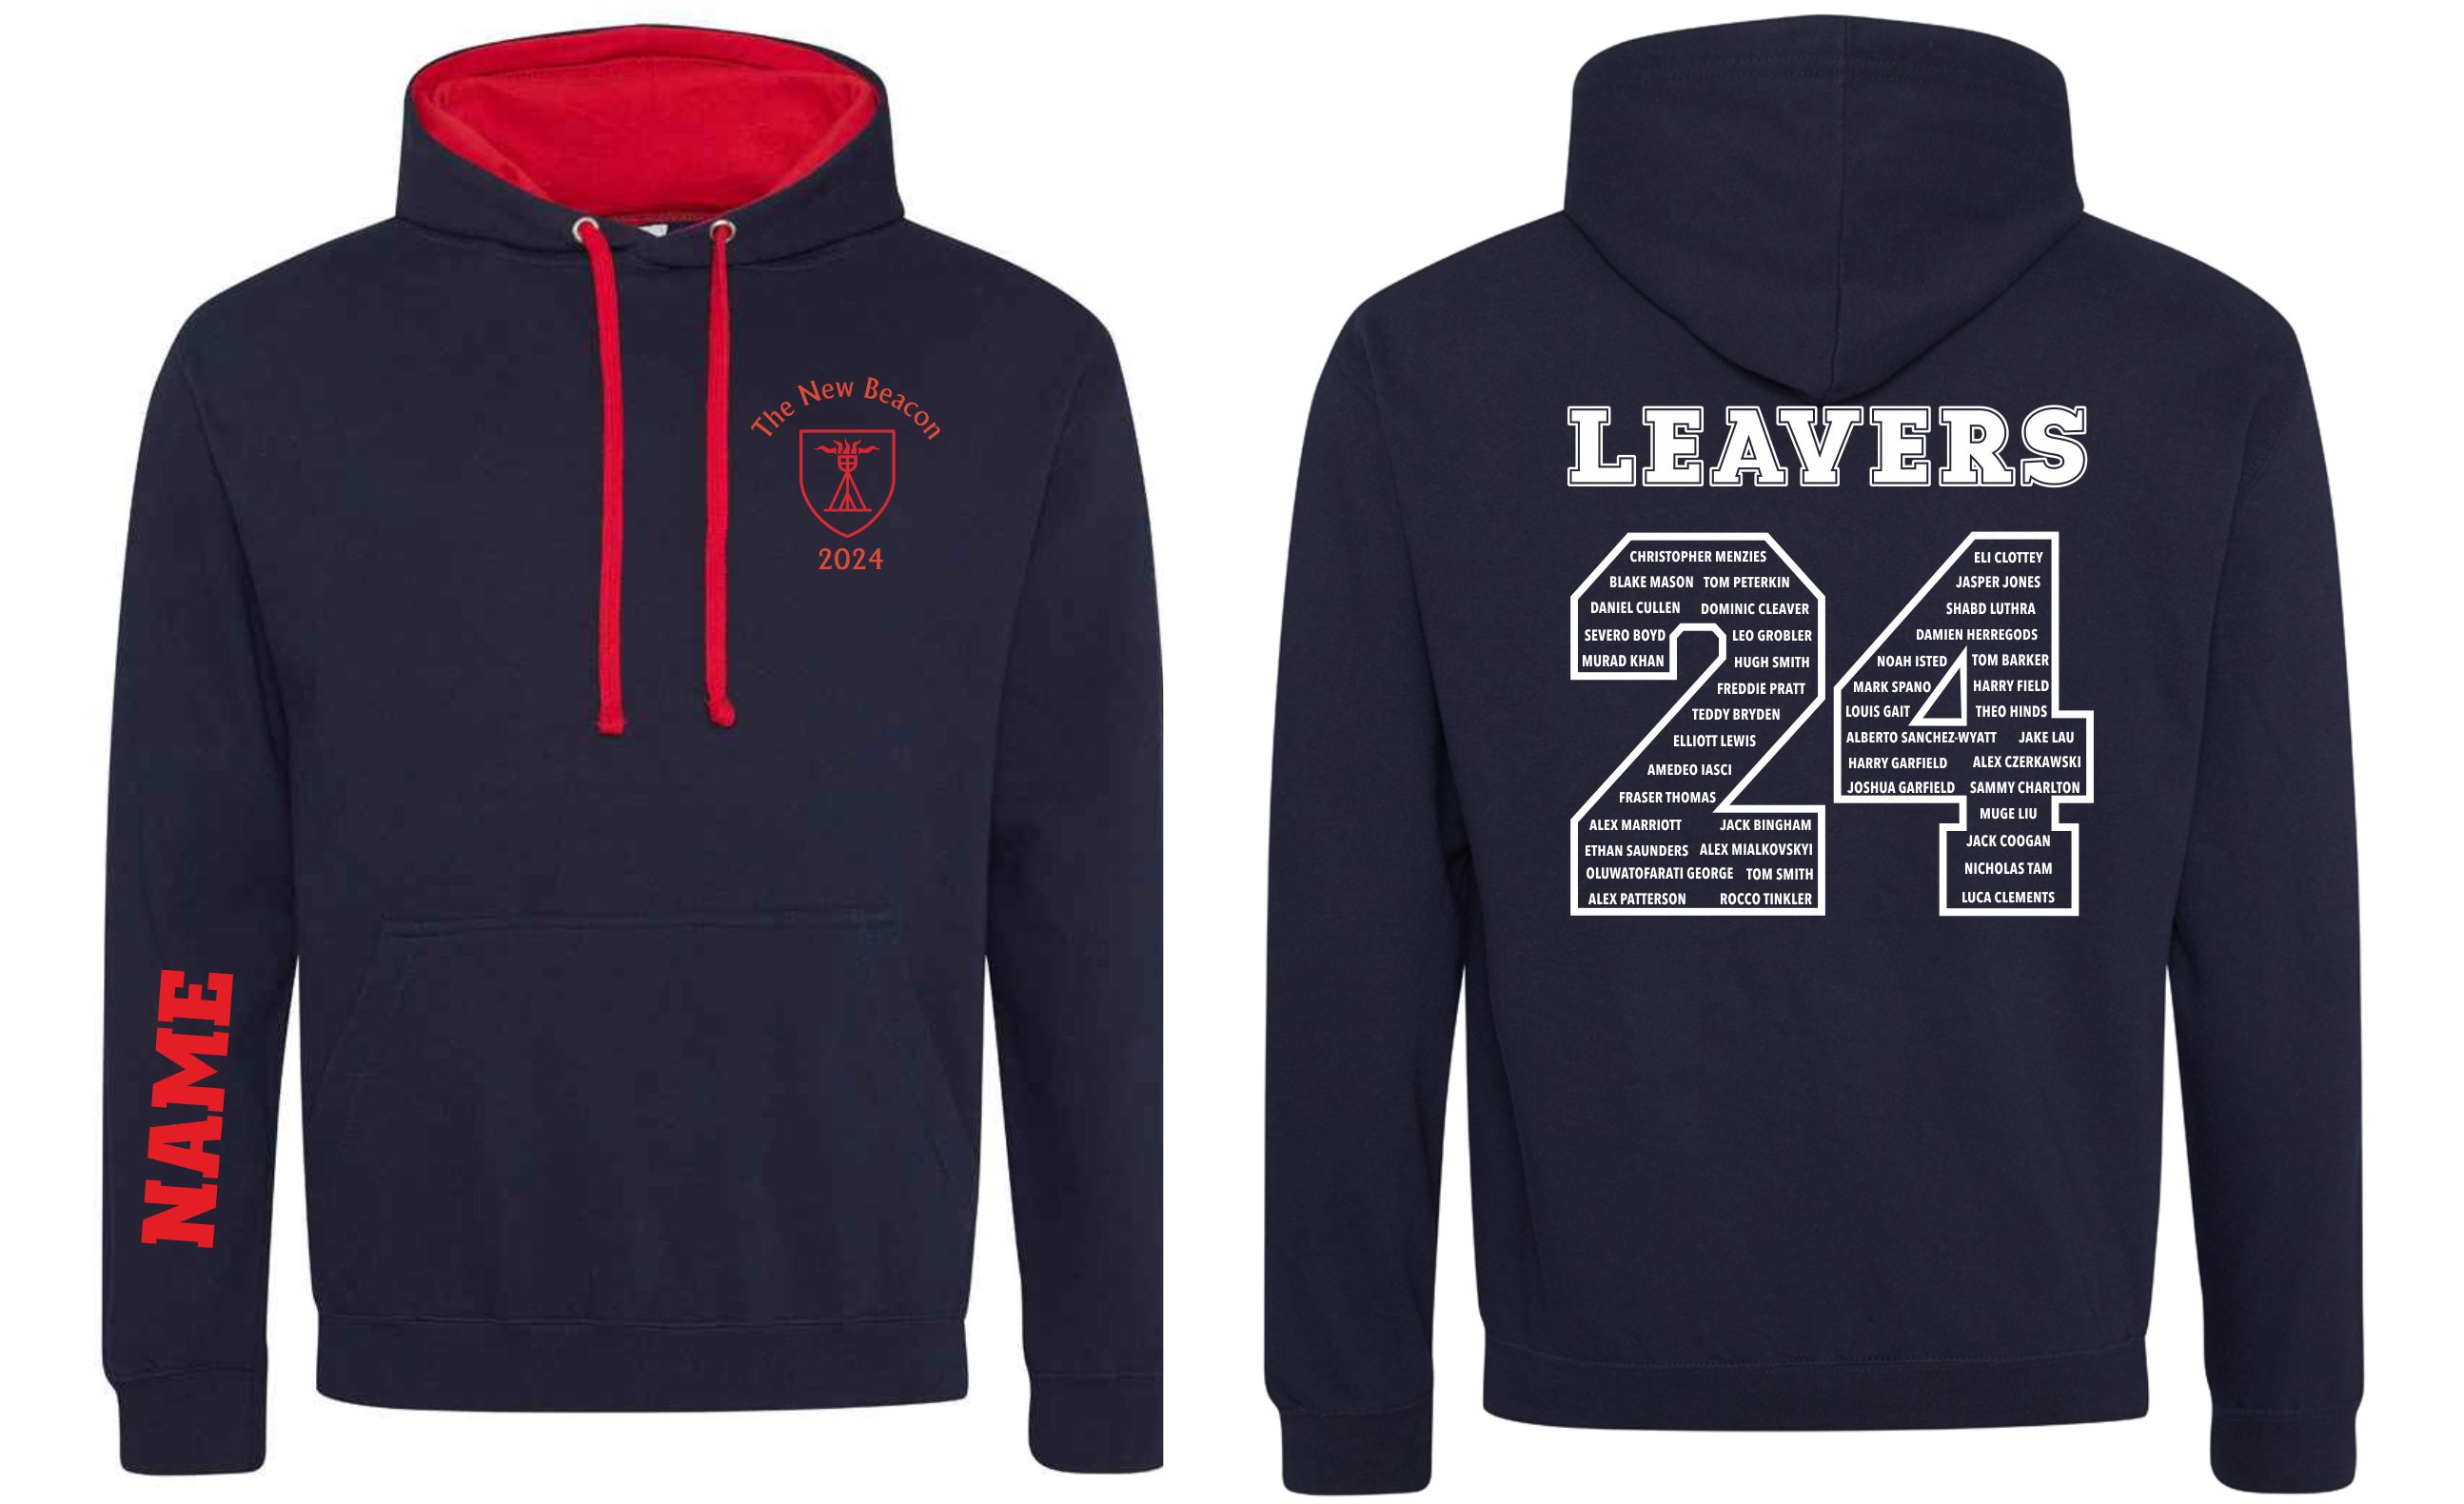 New Beacon YEAR 8 Hoodie ADULT sizes